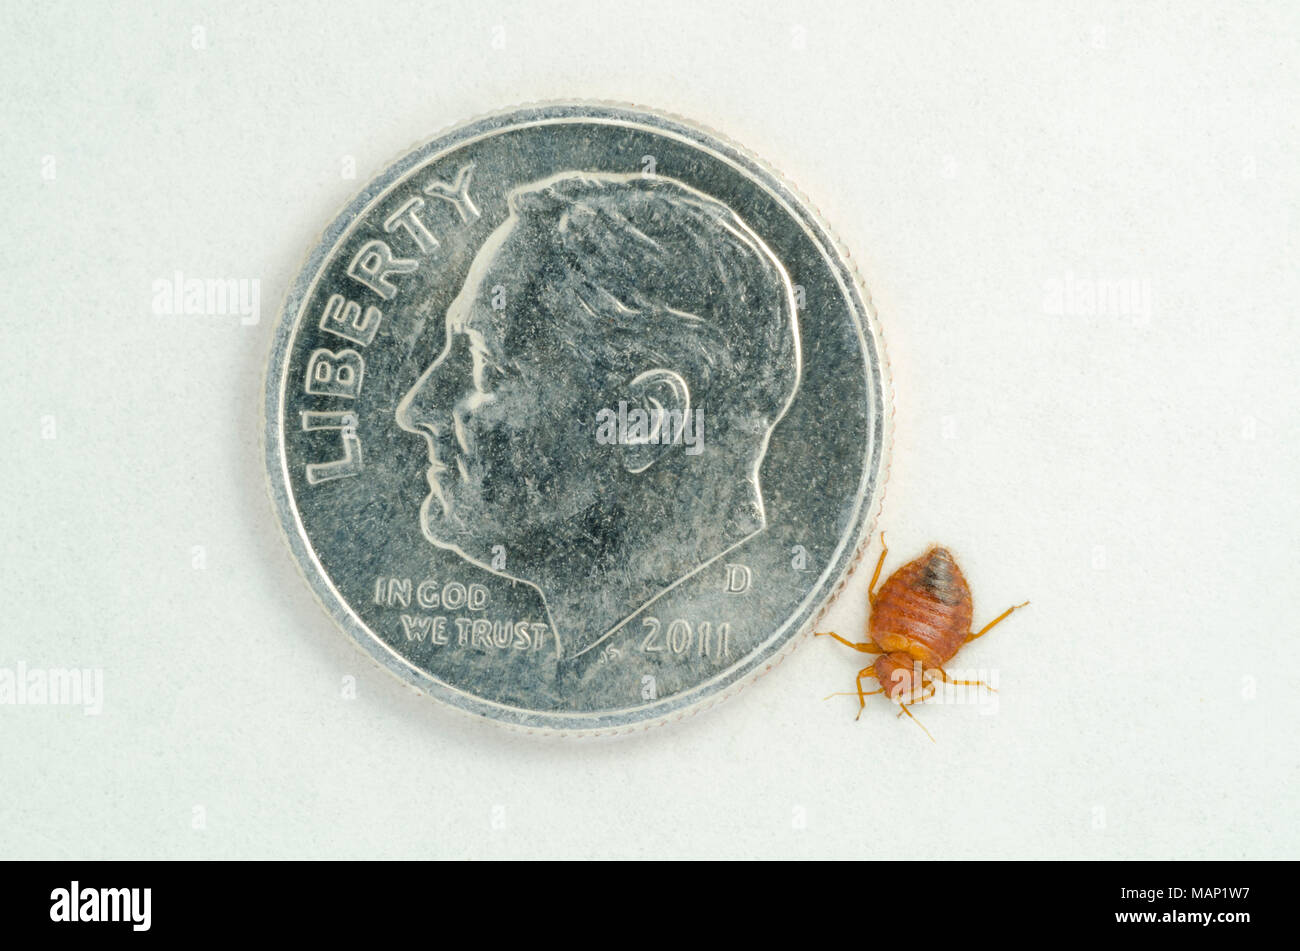 Common adult Bed bug- Bedbug (Cimex lectularius) compared to a US Roosevelt dime-10 cent coin showing relational size of insect. Stock Photo